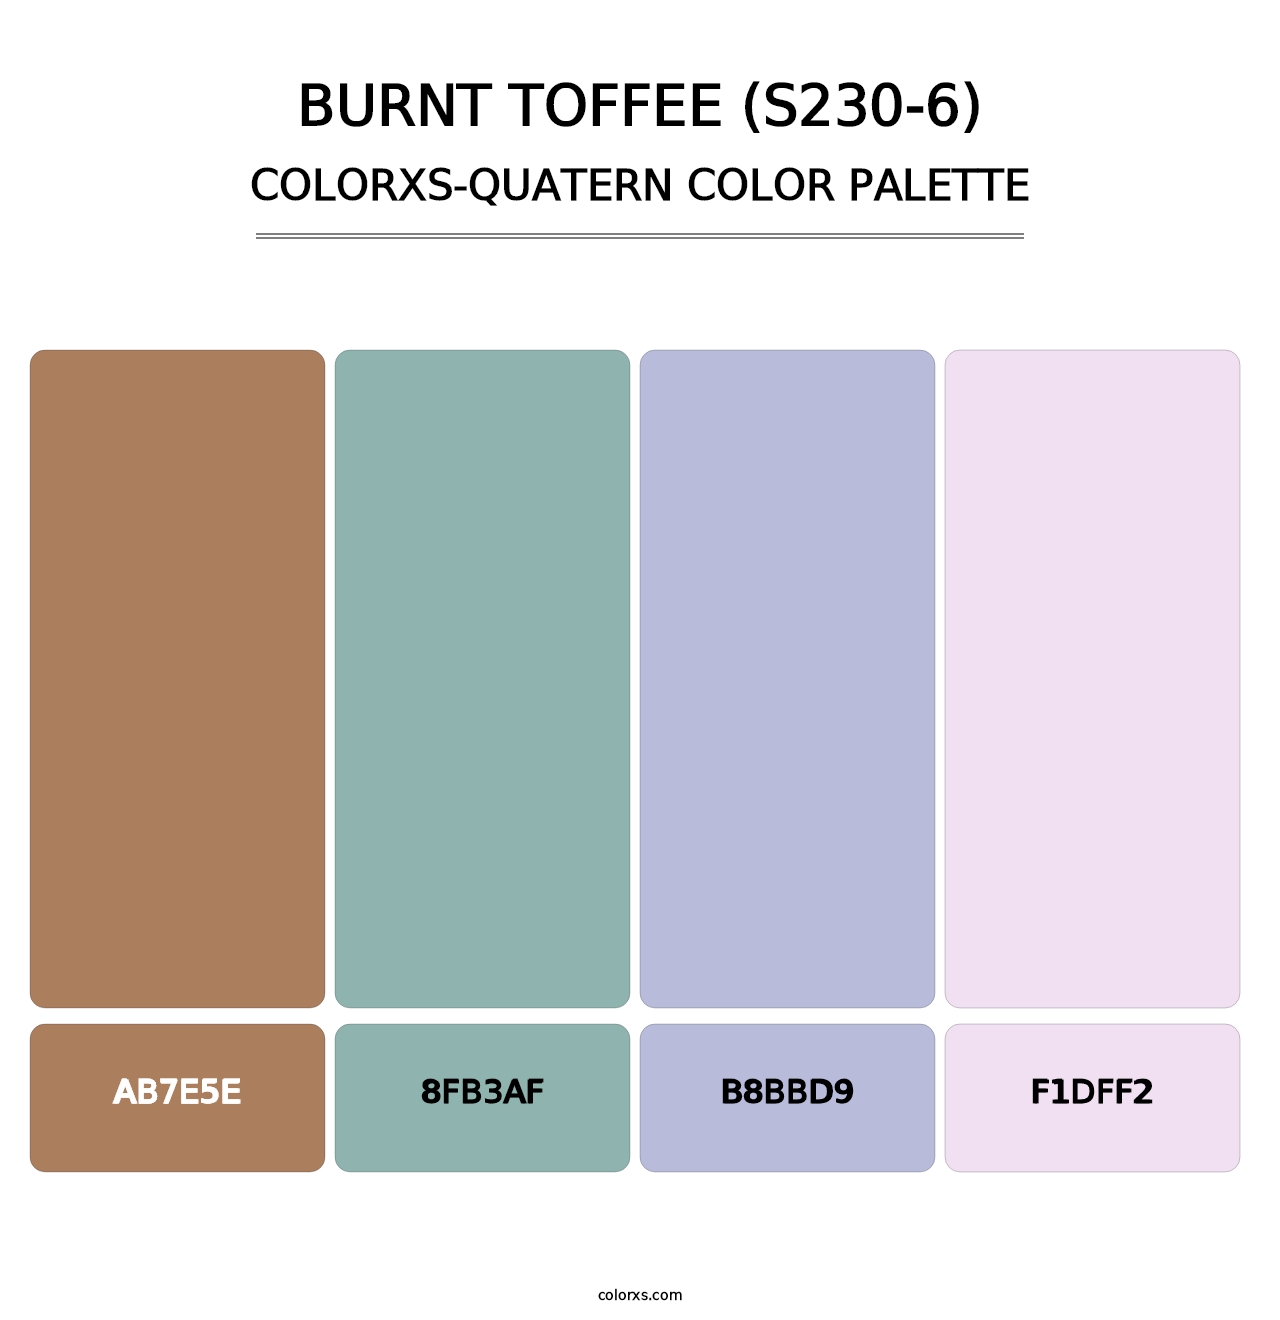 Burnt Toffee (S230-6) - Colorxs Quatern Palette